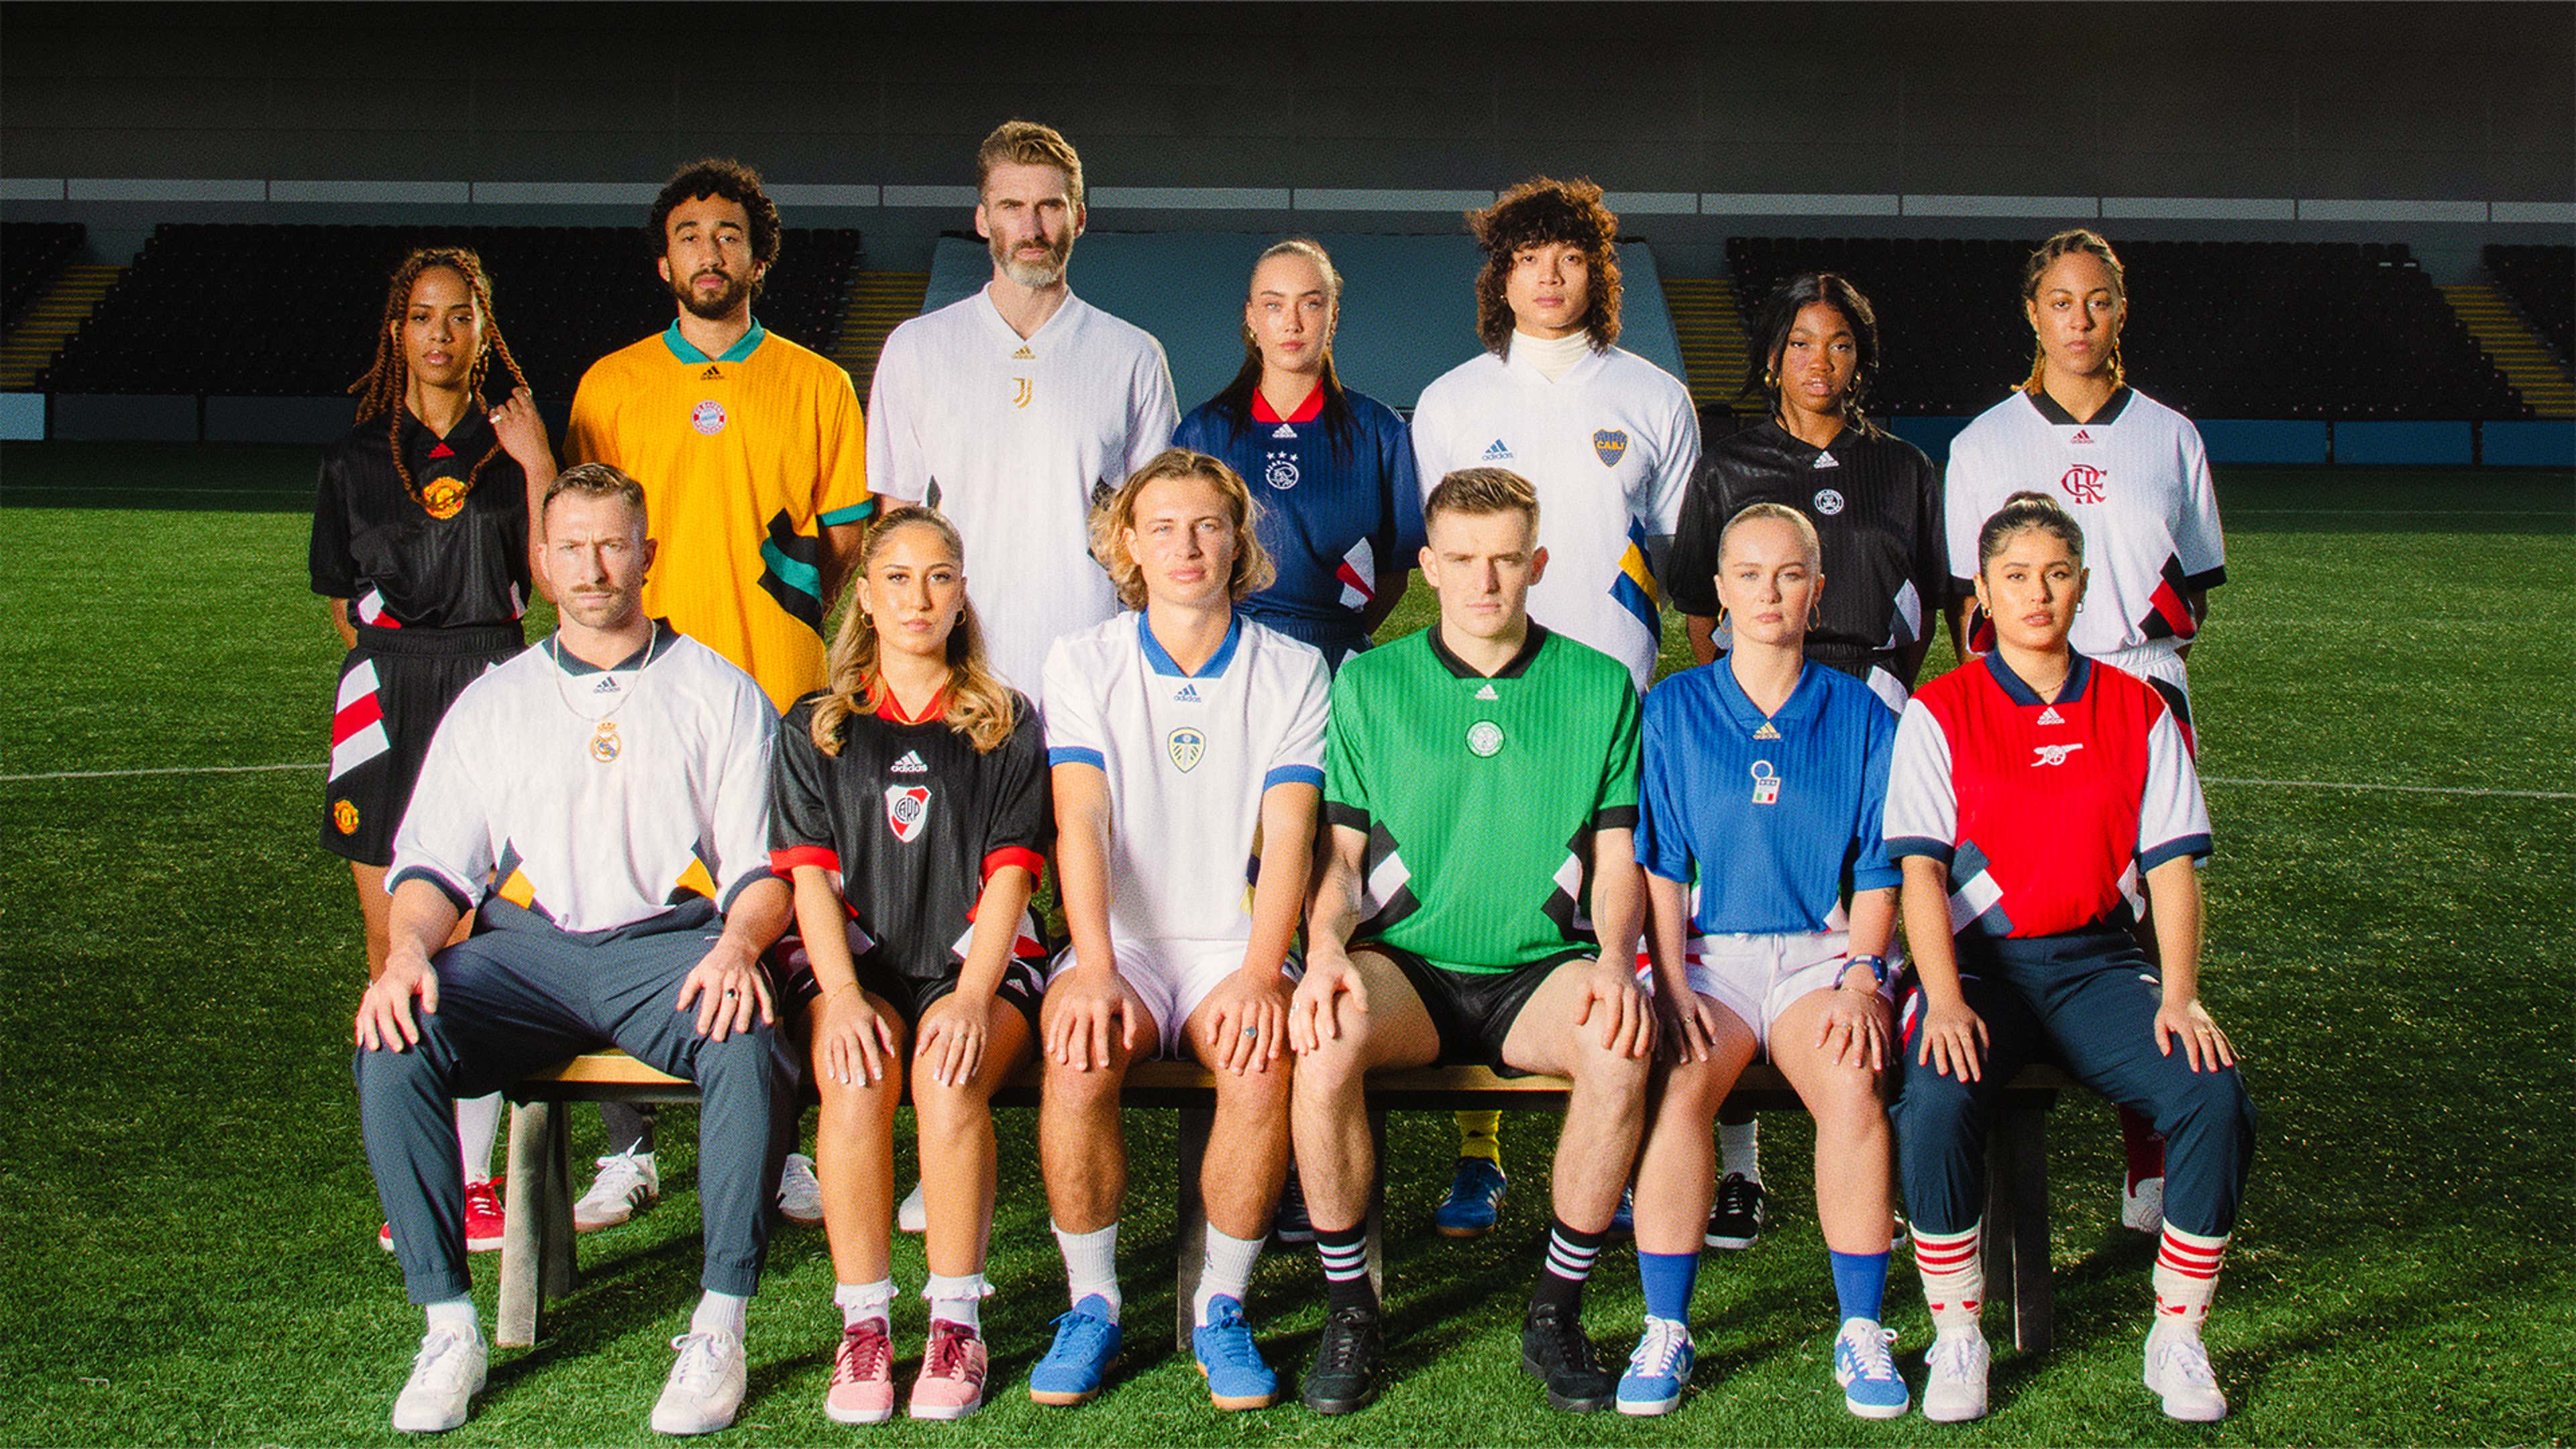 adidas bring back '90s football nostalgia with its latest icons collection